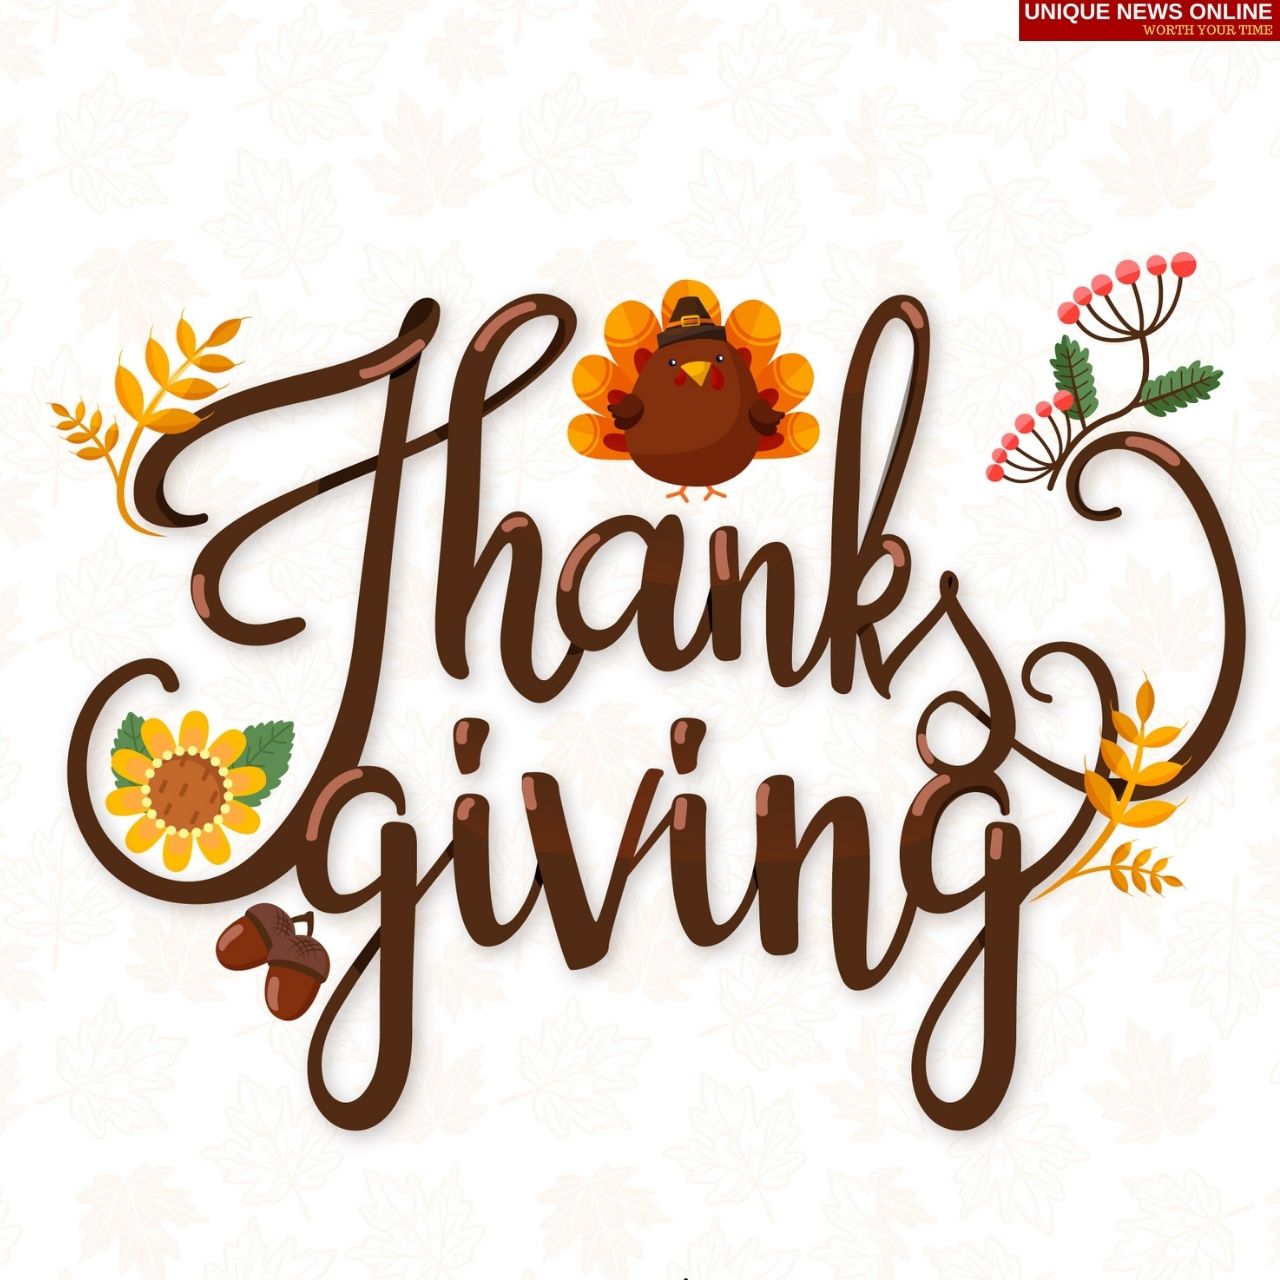 Thanksgiving 2021 Instagram Caption, Facebook Messages, WhatsApp Stickers, and WhatsApp Status to Share